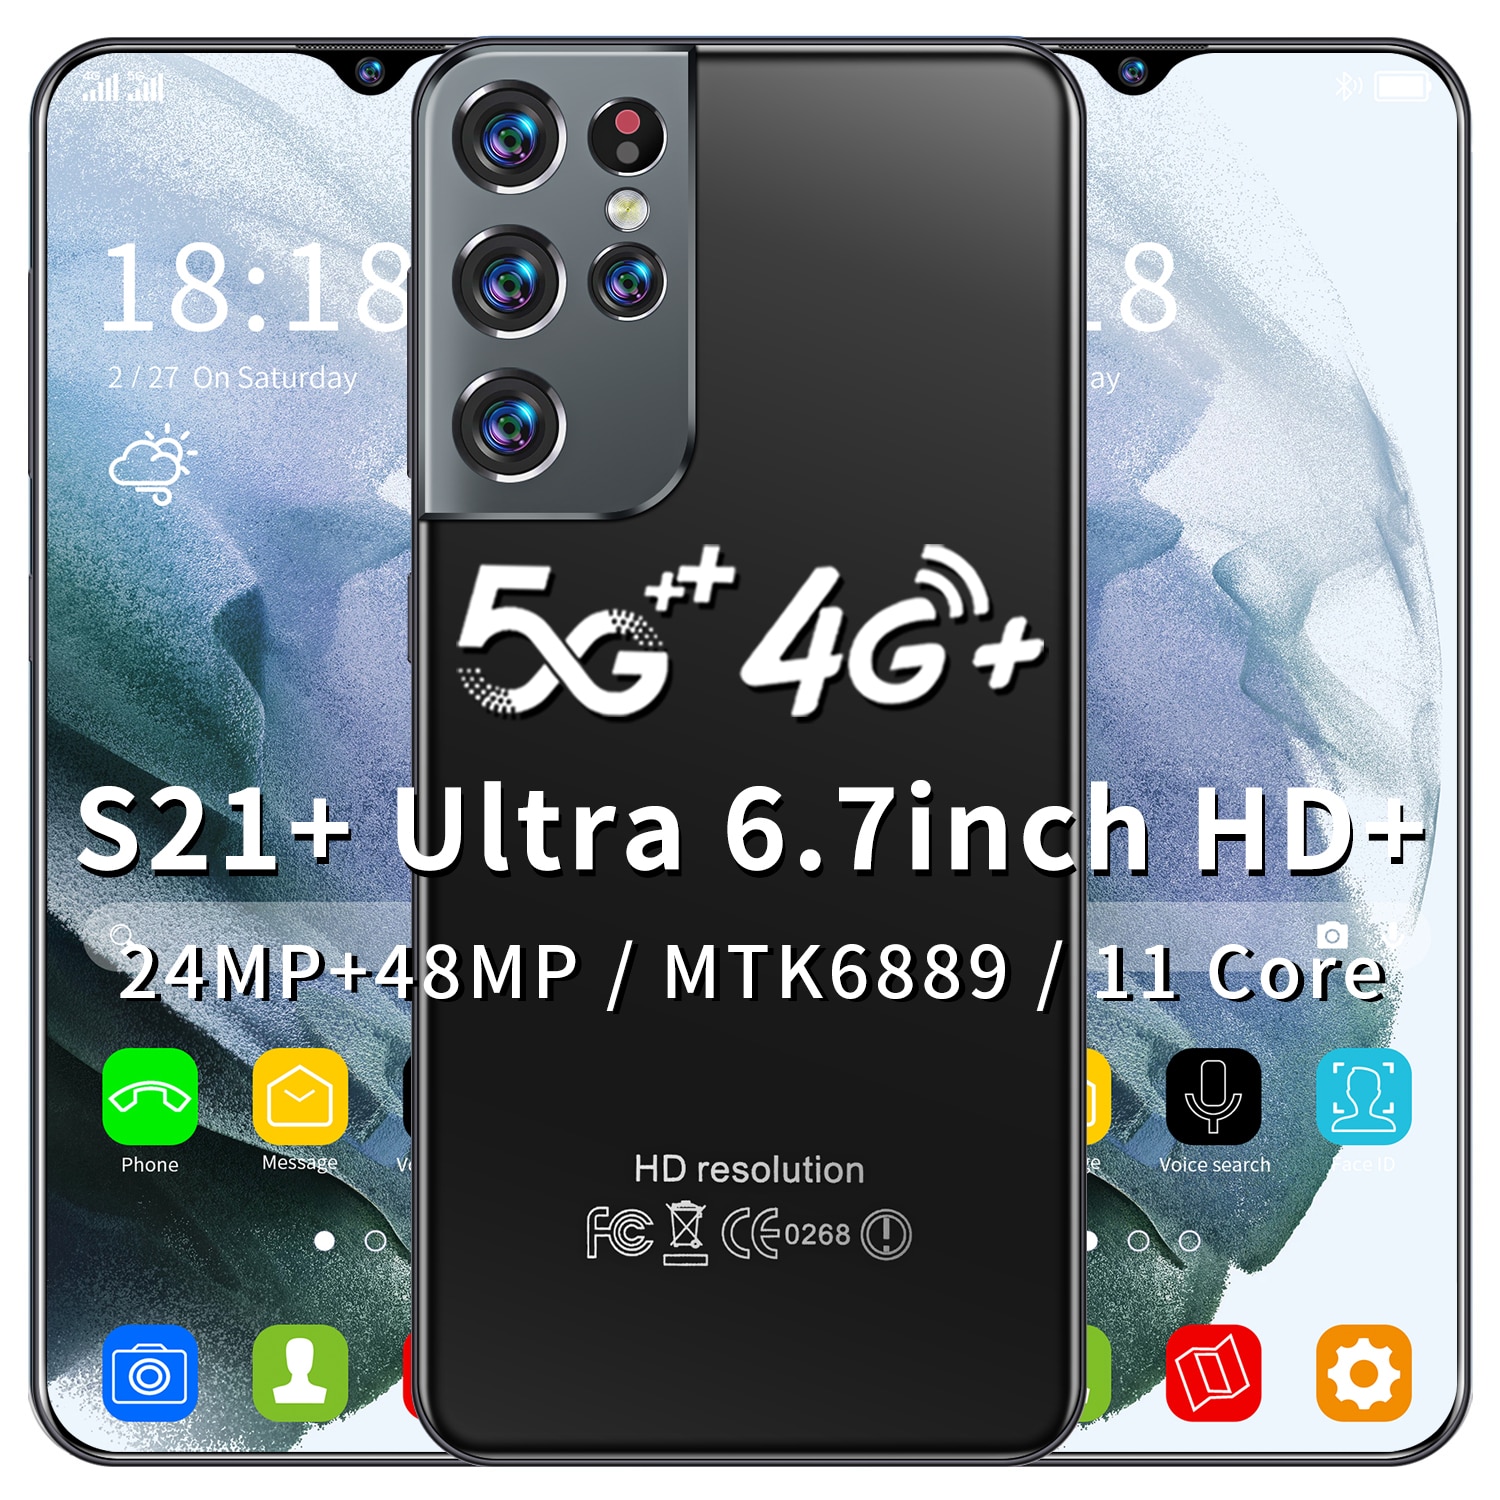 6.7inch S21+ Ultra Smartphone Android 10 Telephone Really 24MP+48MP 11 Core Face ID HD+ 16GB 512GB 6500 mAh 5G MTK6889